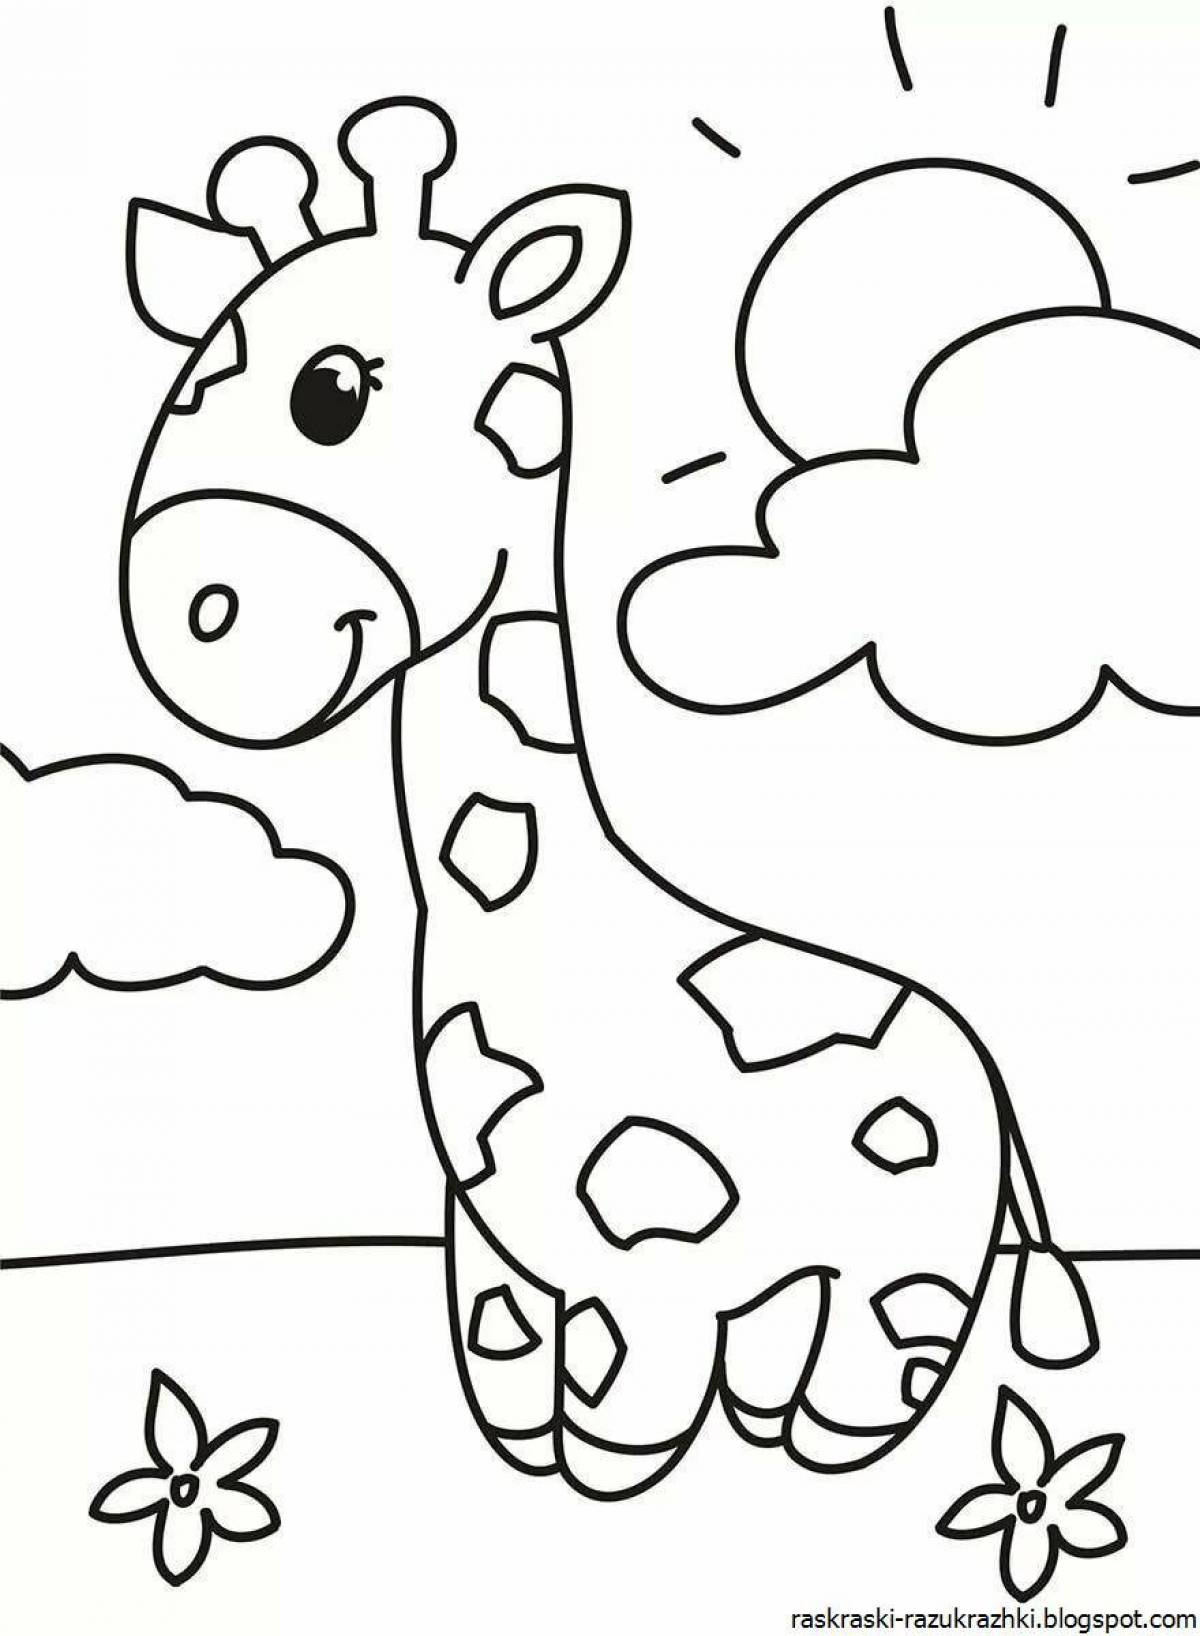 Colorful animal coloring pages for children 5-7 years old